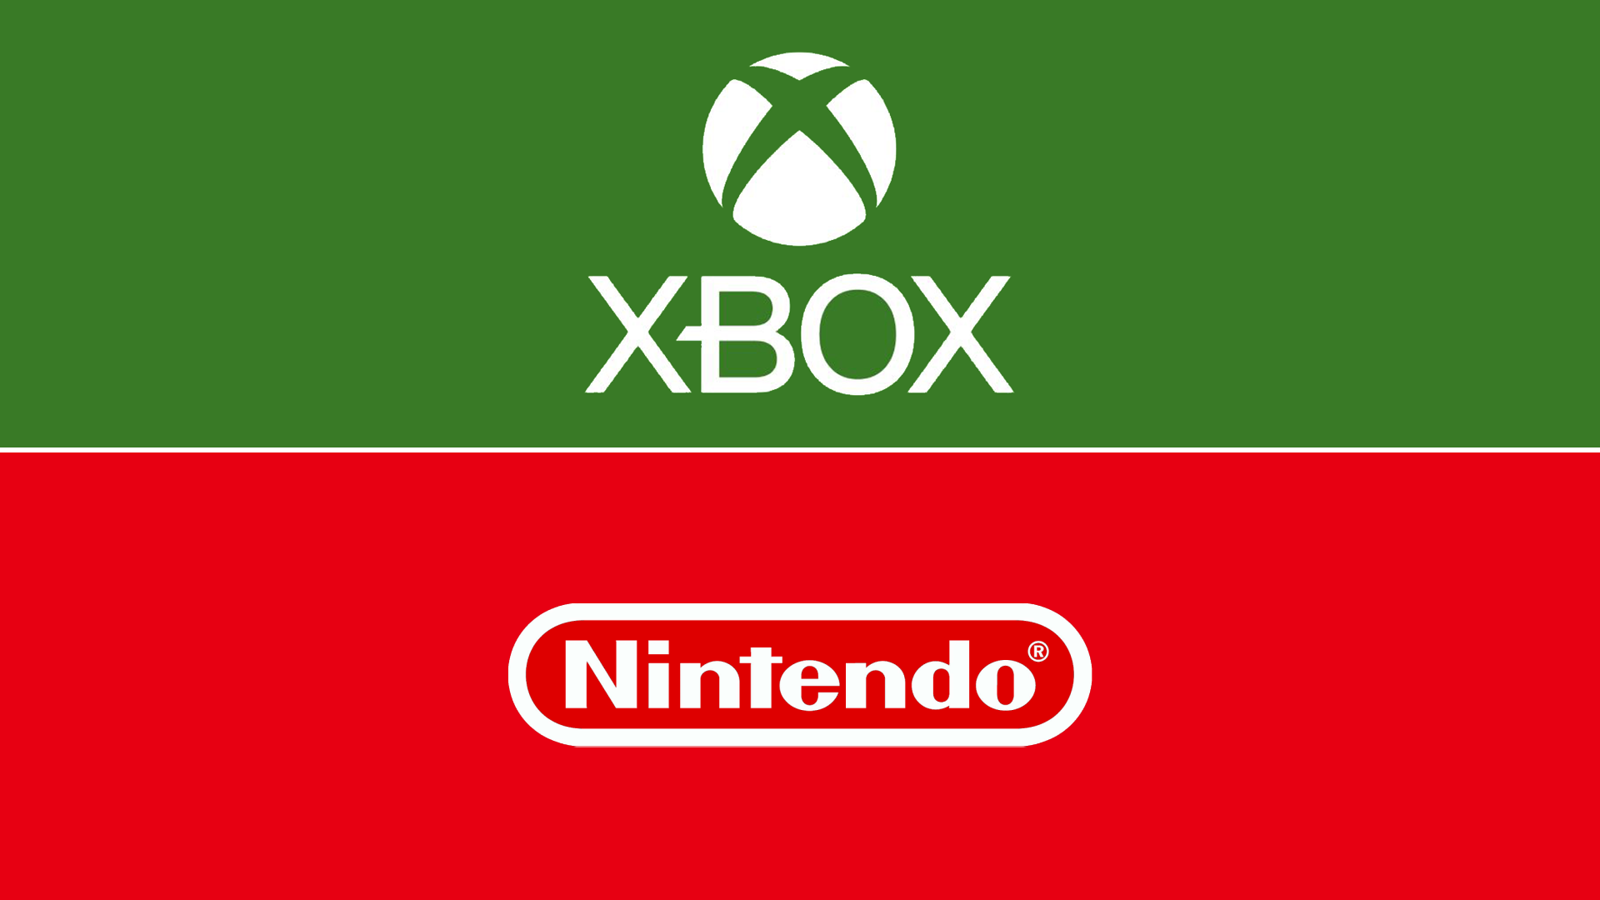 Phil Spencer is also keen to buy Nintendo, leaked documents reveal